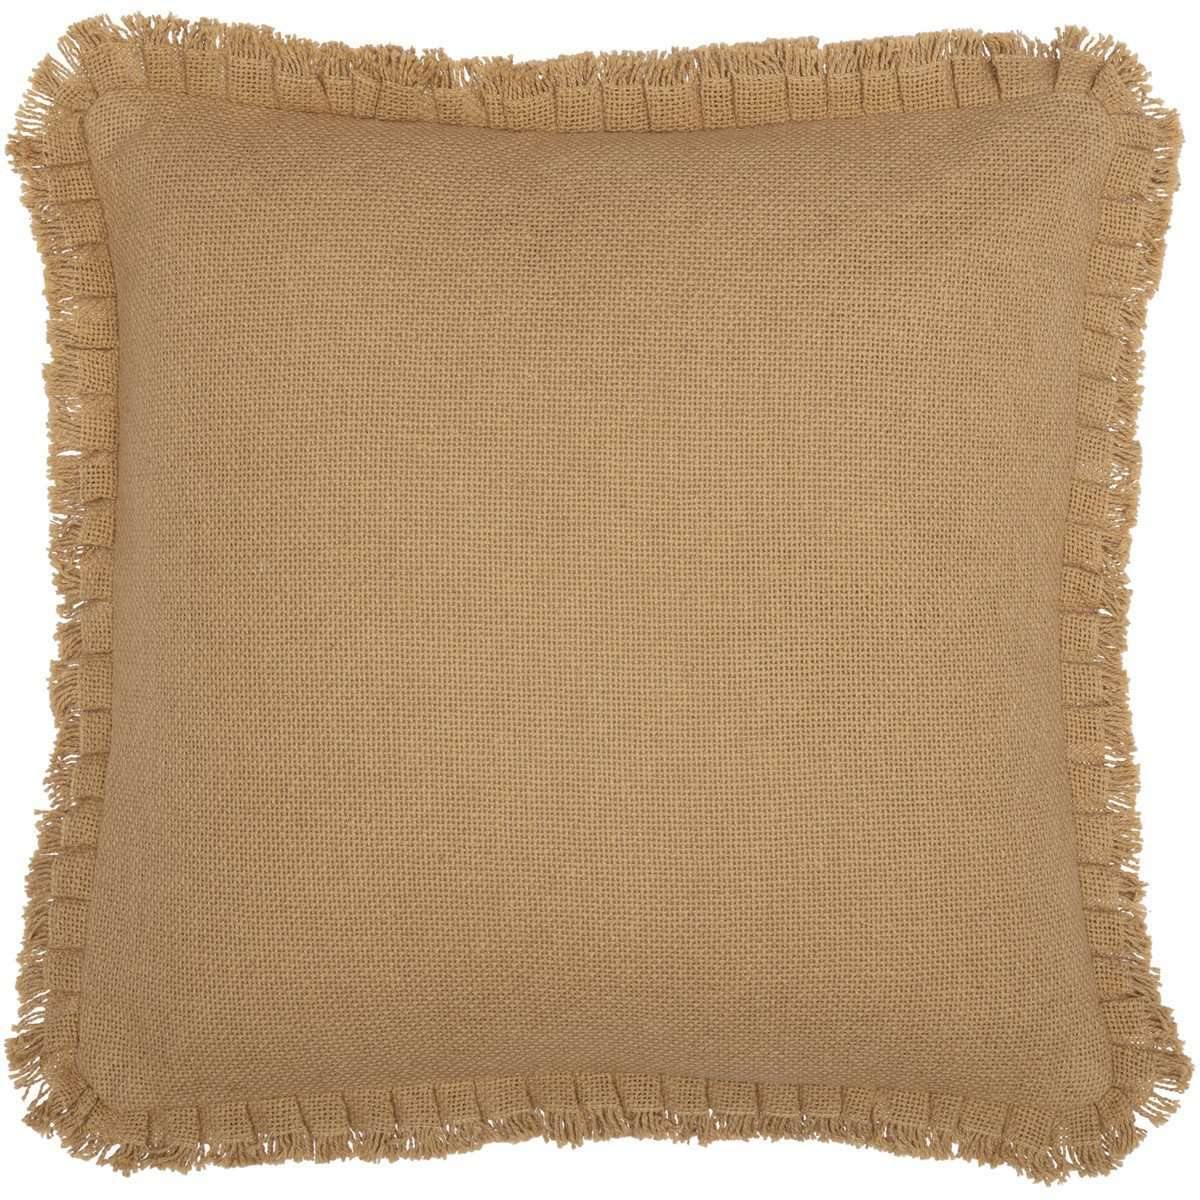 Burlap Natural Pillow w/ Fringed Ruffle 18x18 VHC Brands front